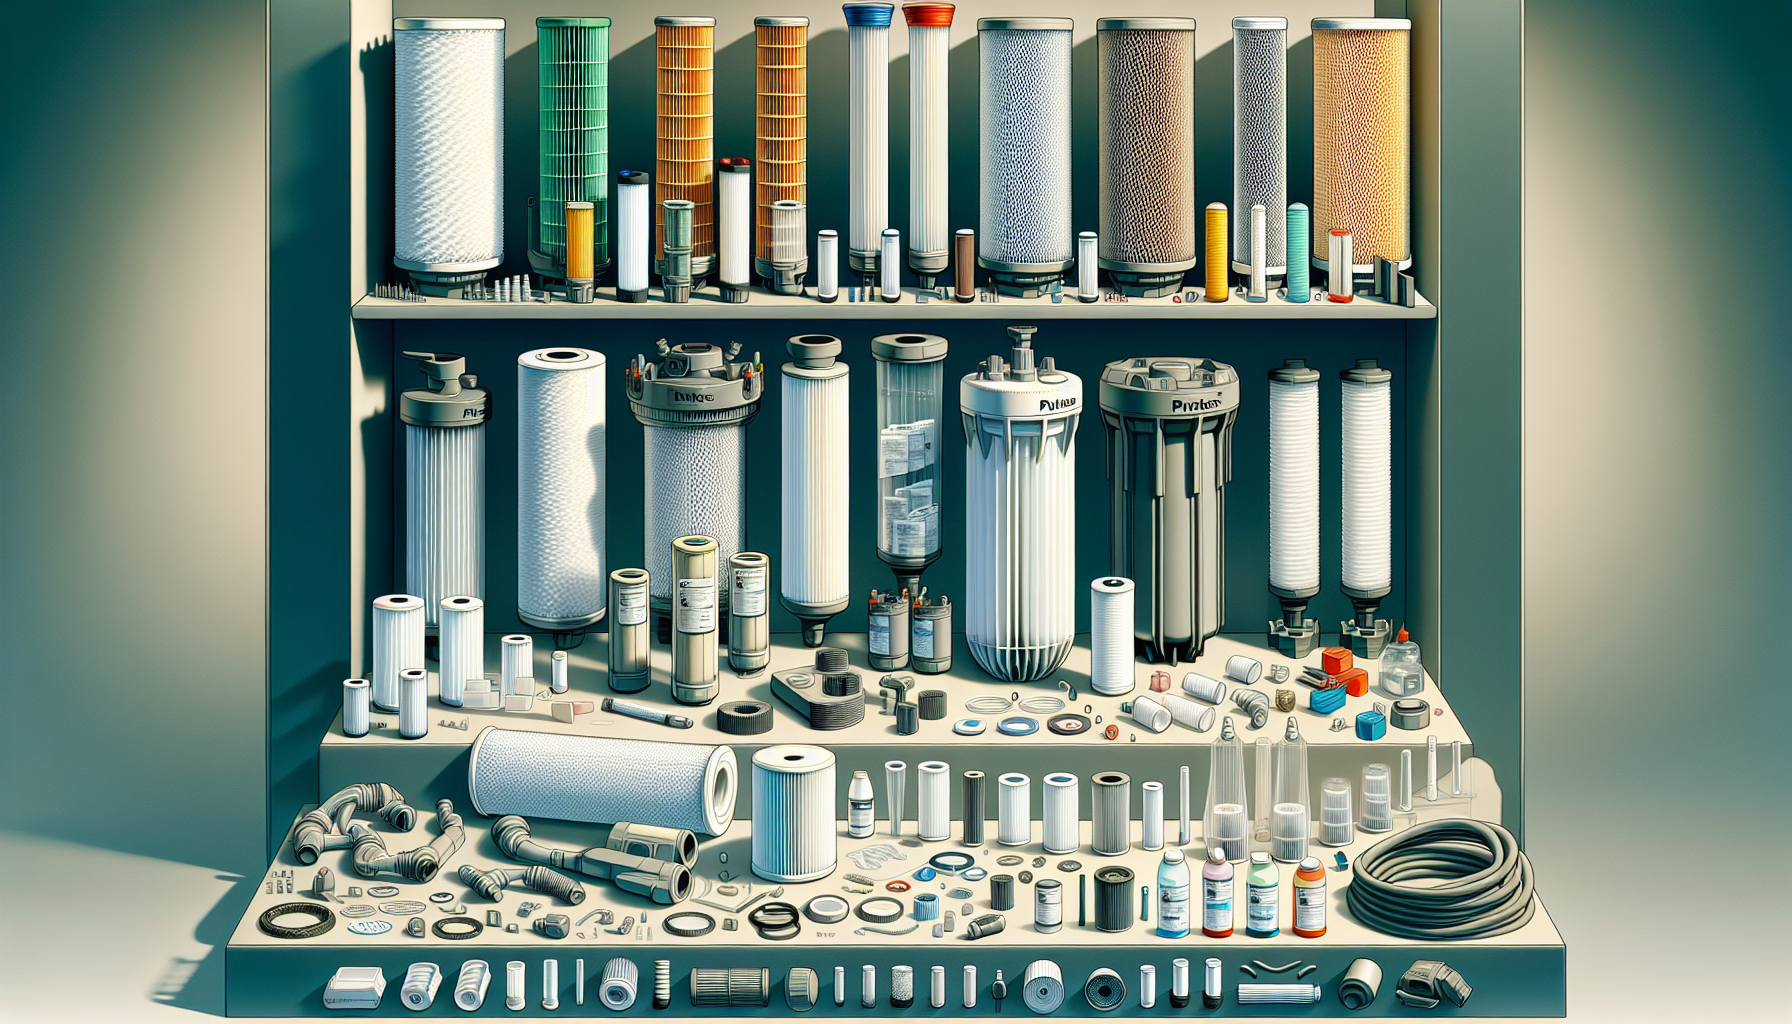 Illustration of various replacement filter cartridges and accessories